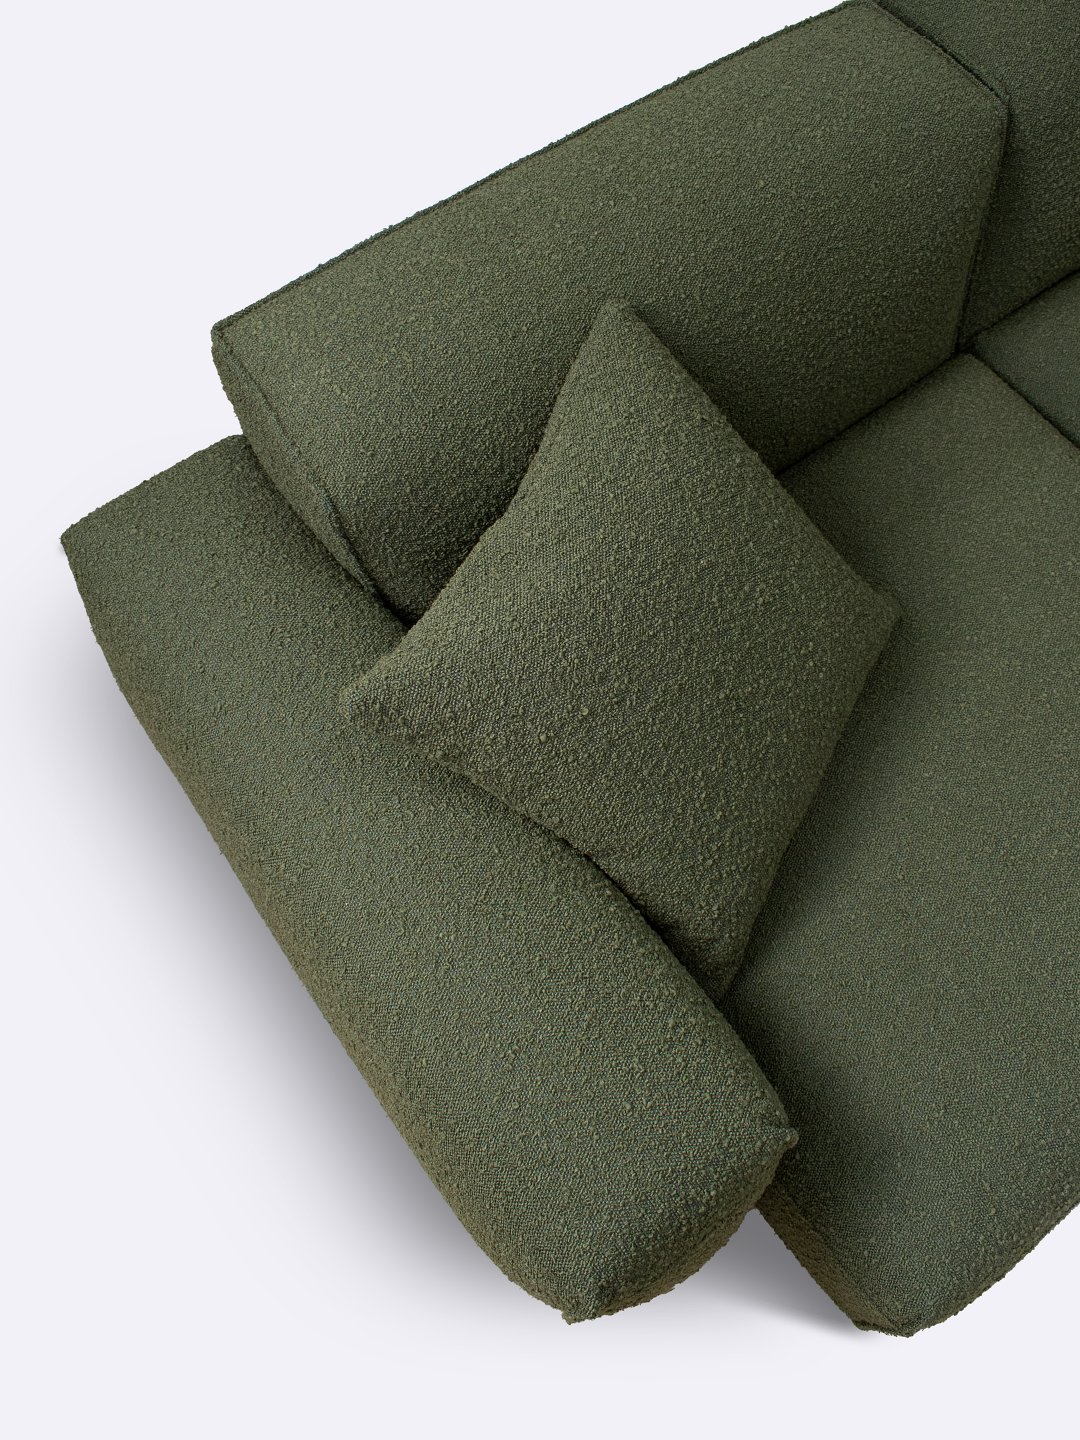 Evie Sofa Boucle Olive Arm Detail Green Tallira Furniture By The Rug Collection